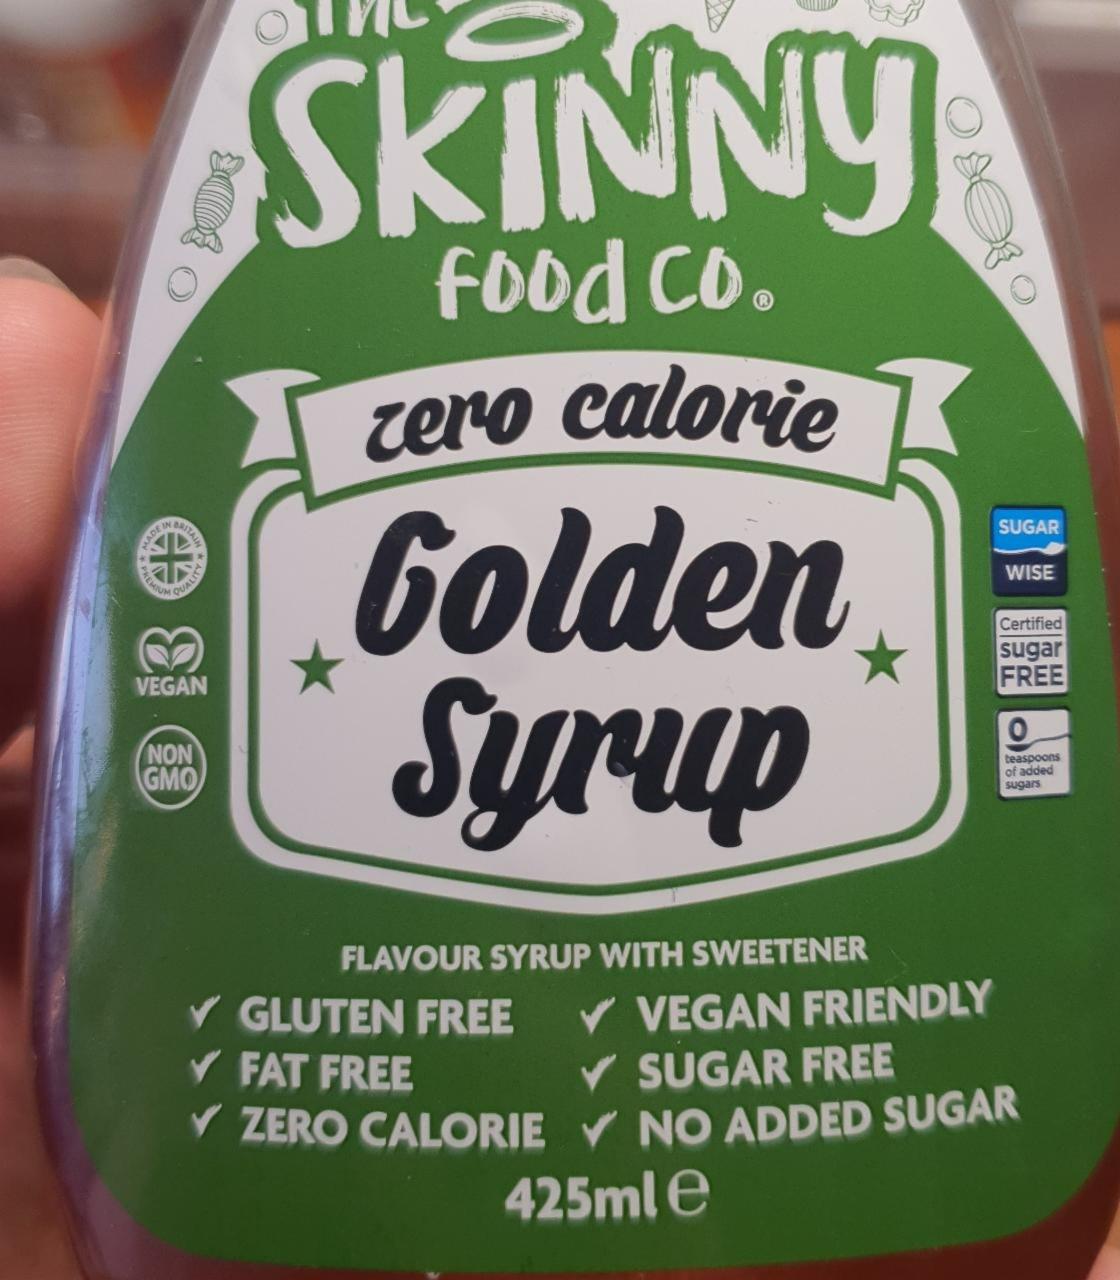 Fotografie - Zero calorie Golden syrup The Skinny Food Co